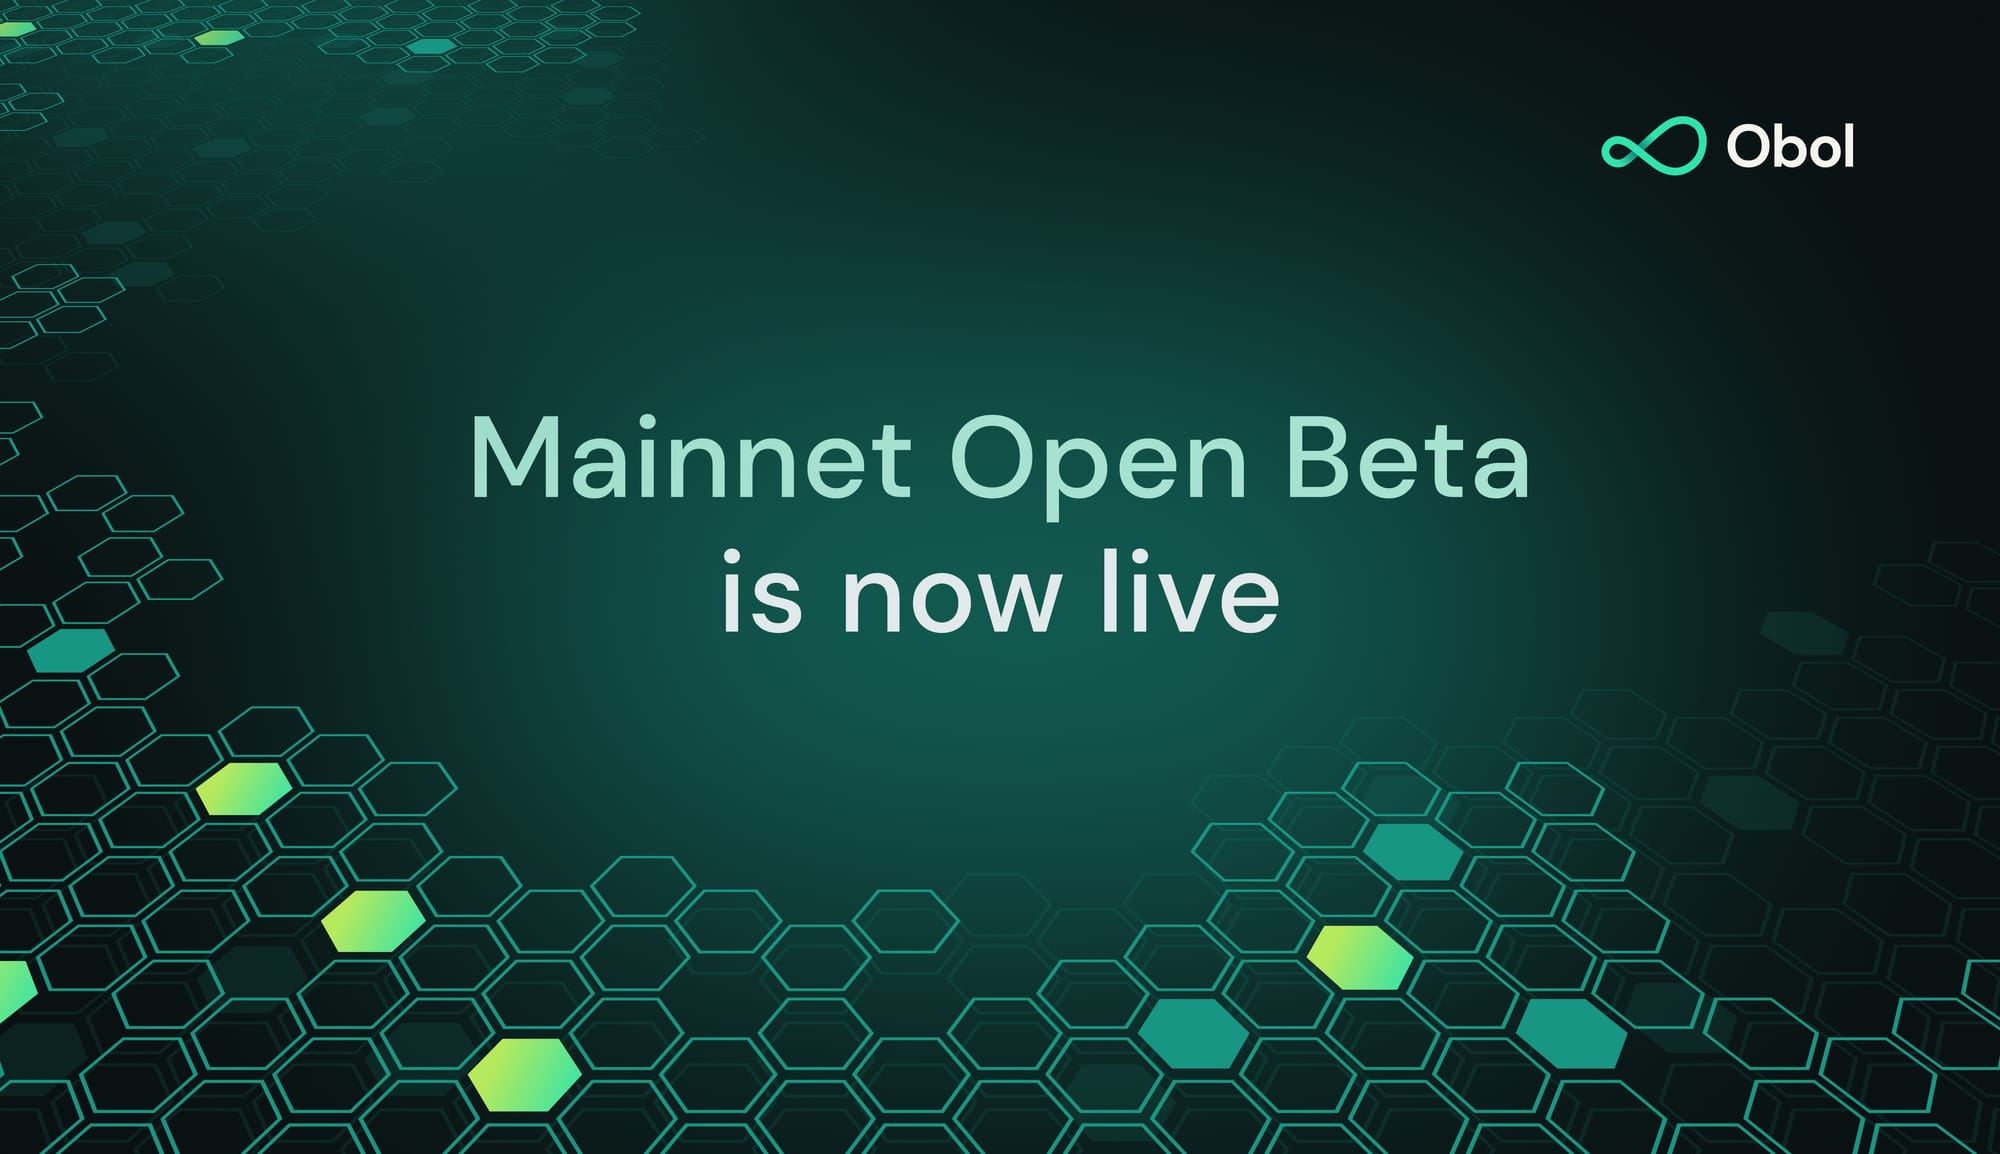 Announcing our Mainnet Open Beta Release!